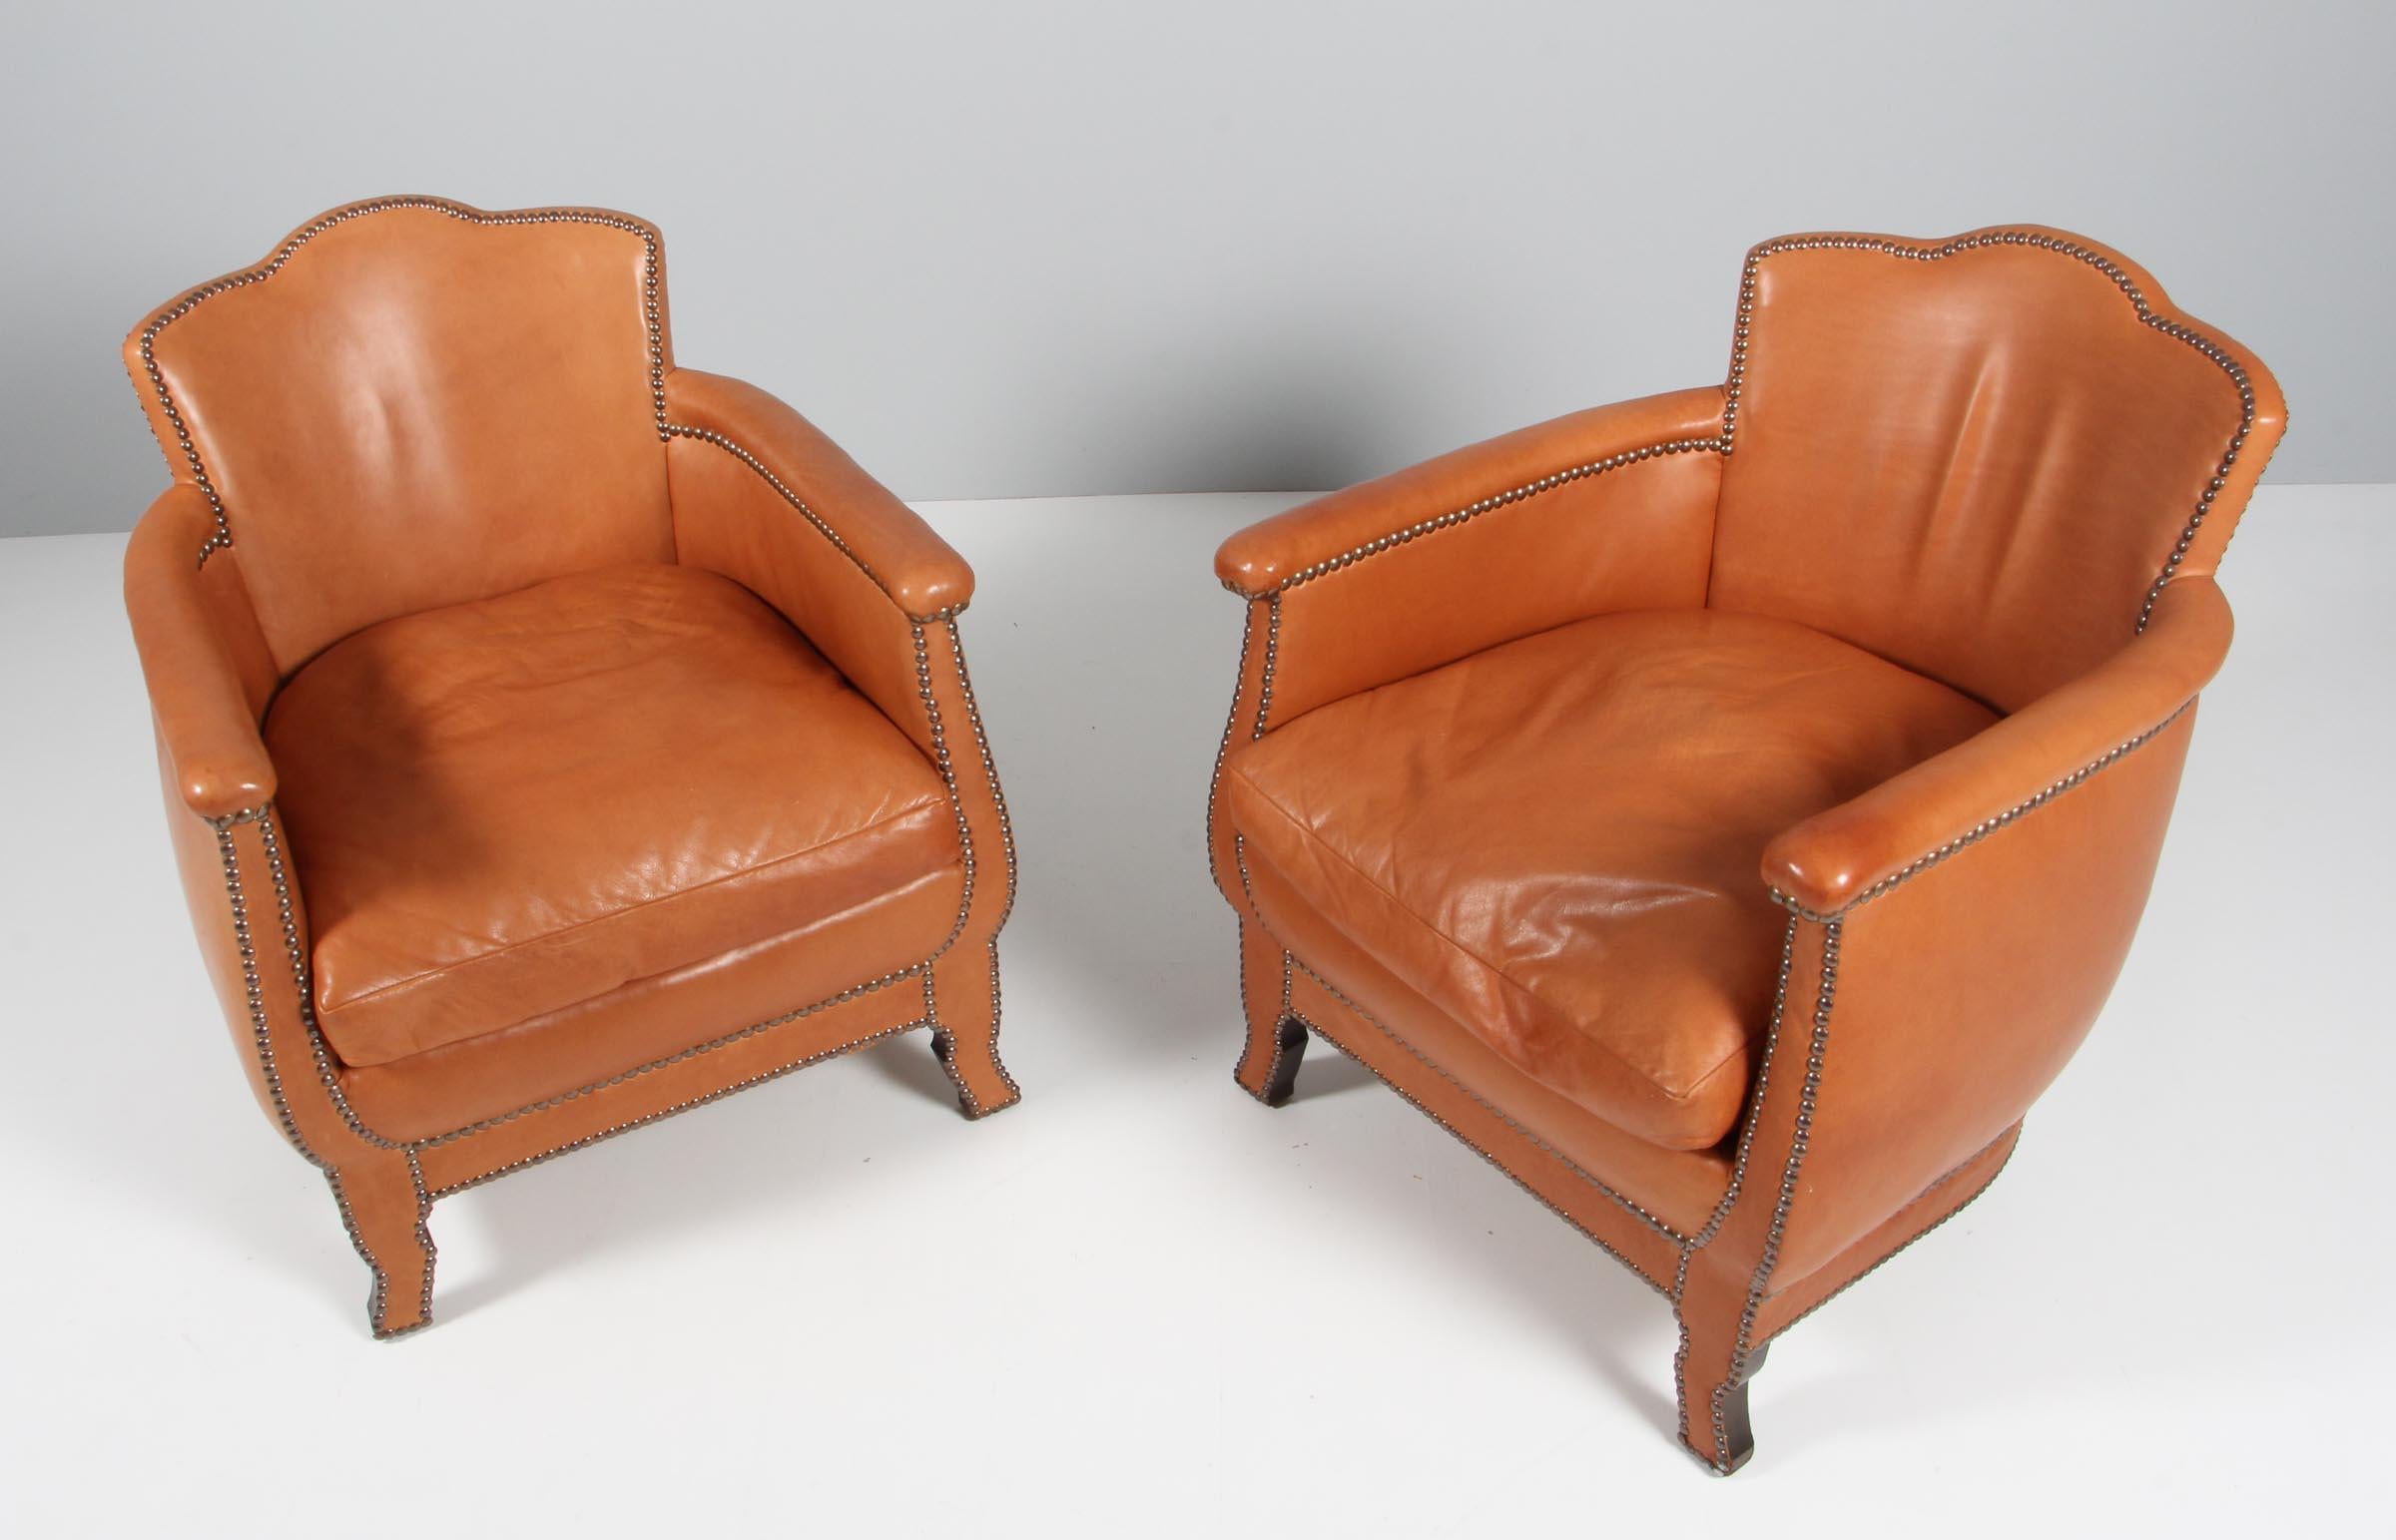 Otto Schulz pair of lounge chairs with original patinated leather.

Made by Boet, in the 1940s.

